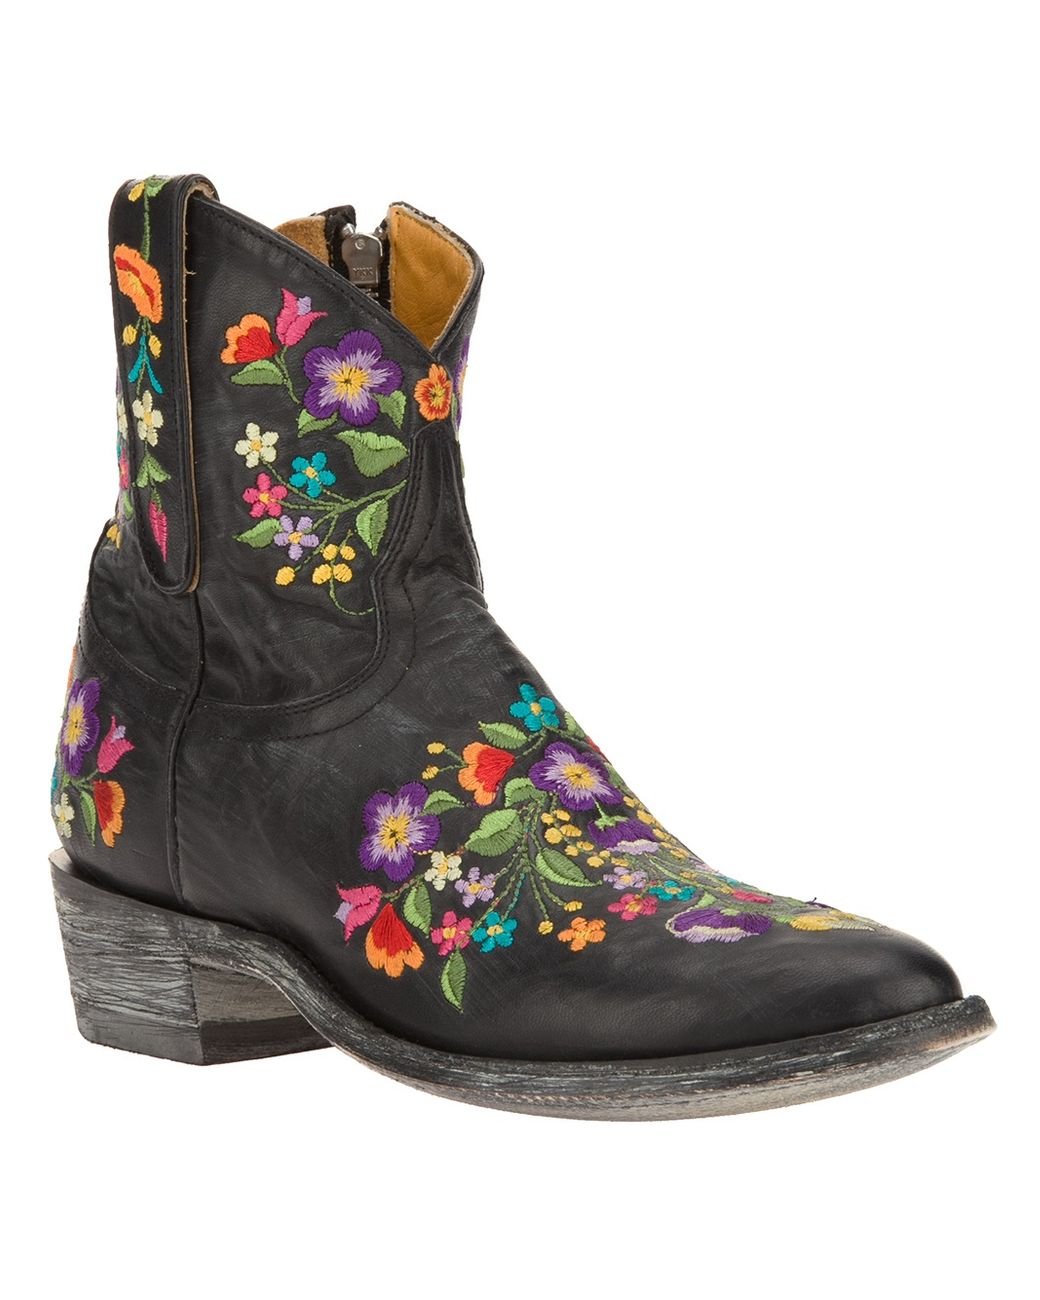 Mexicana Embroidered Floral Ankle Boot in Black | Lyst